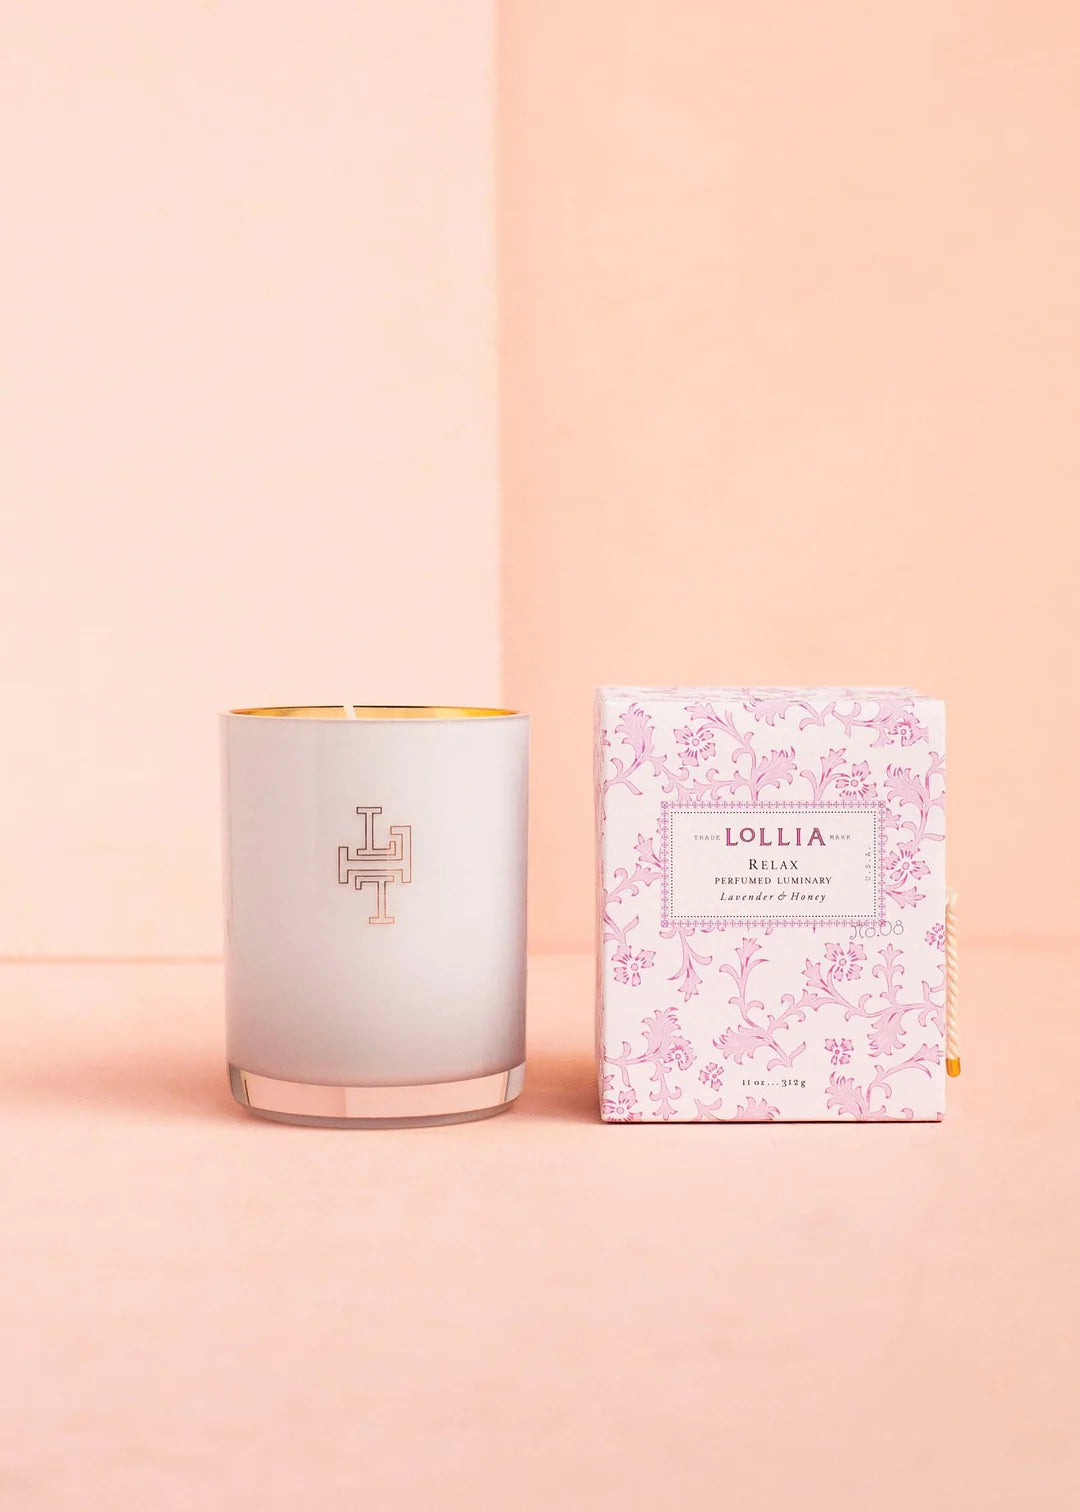 Lollia Relax Perfumed Luminary Candle